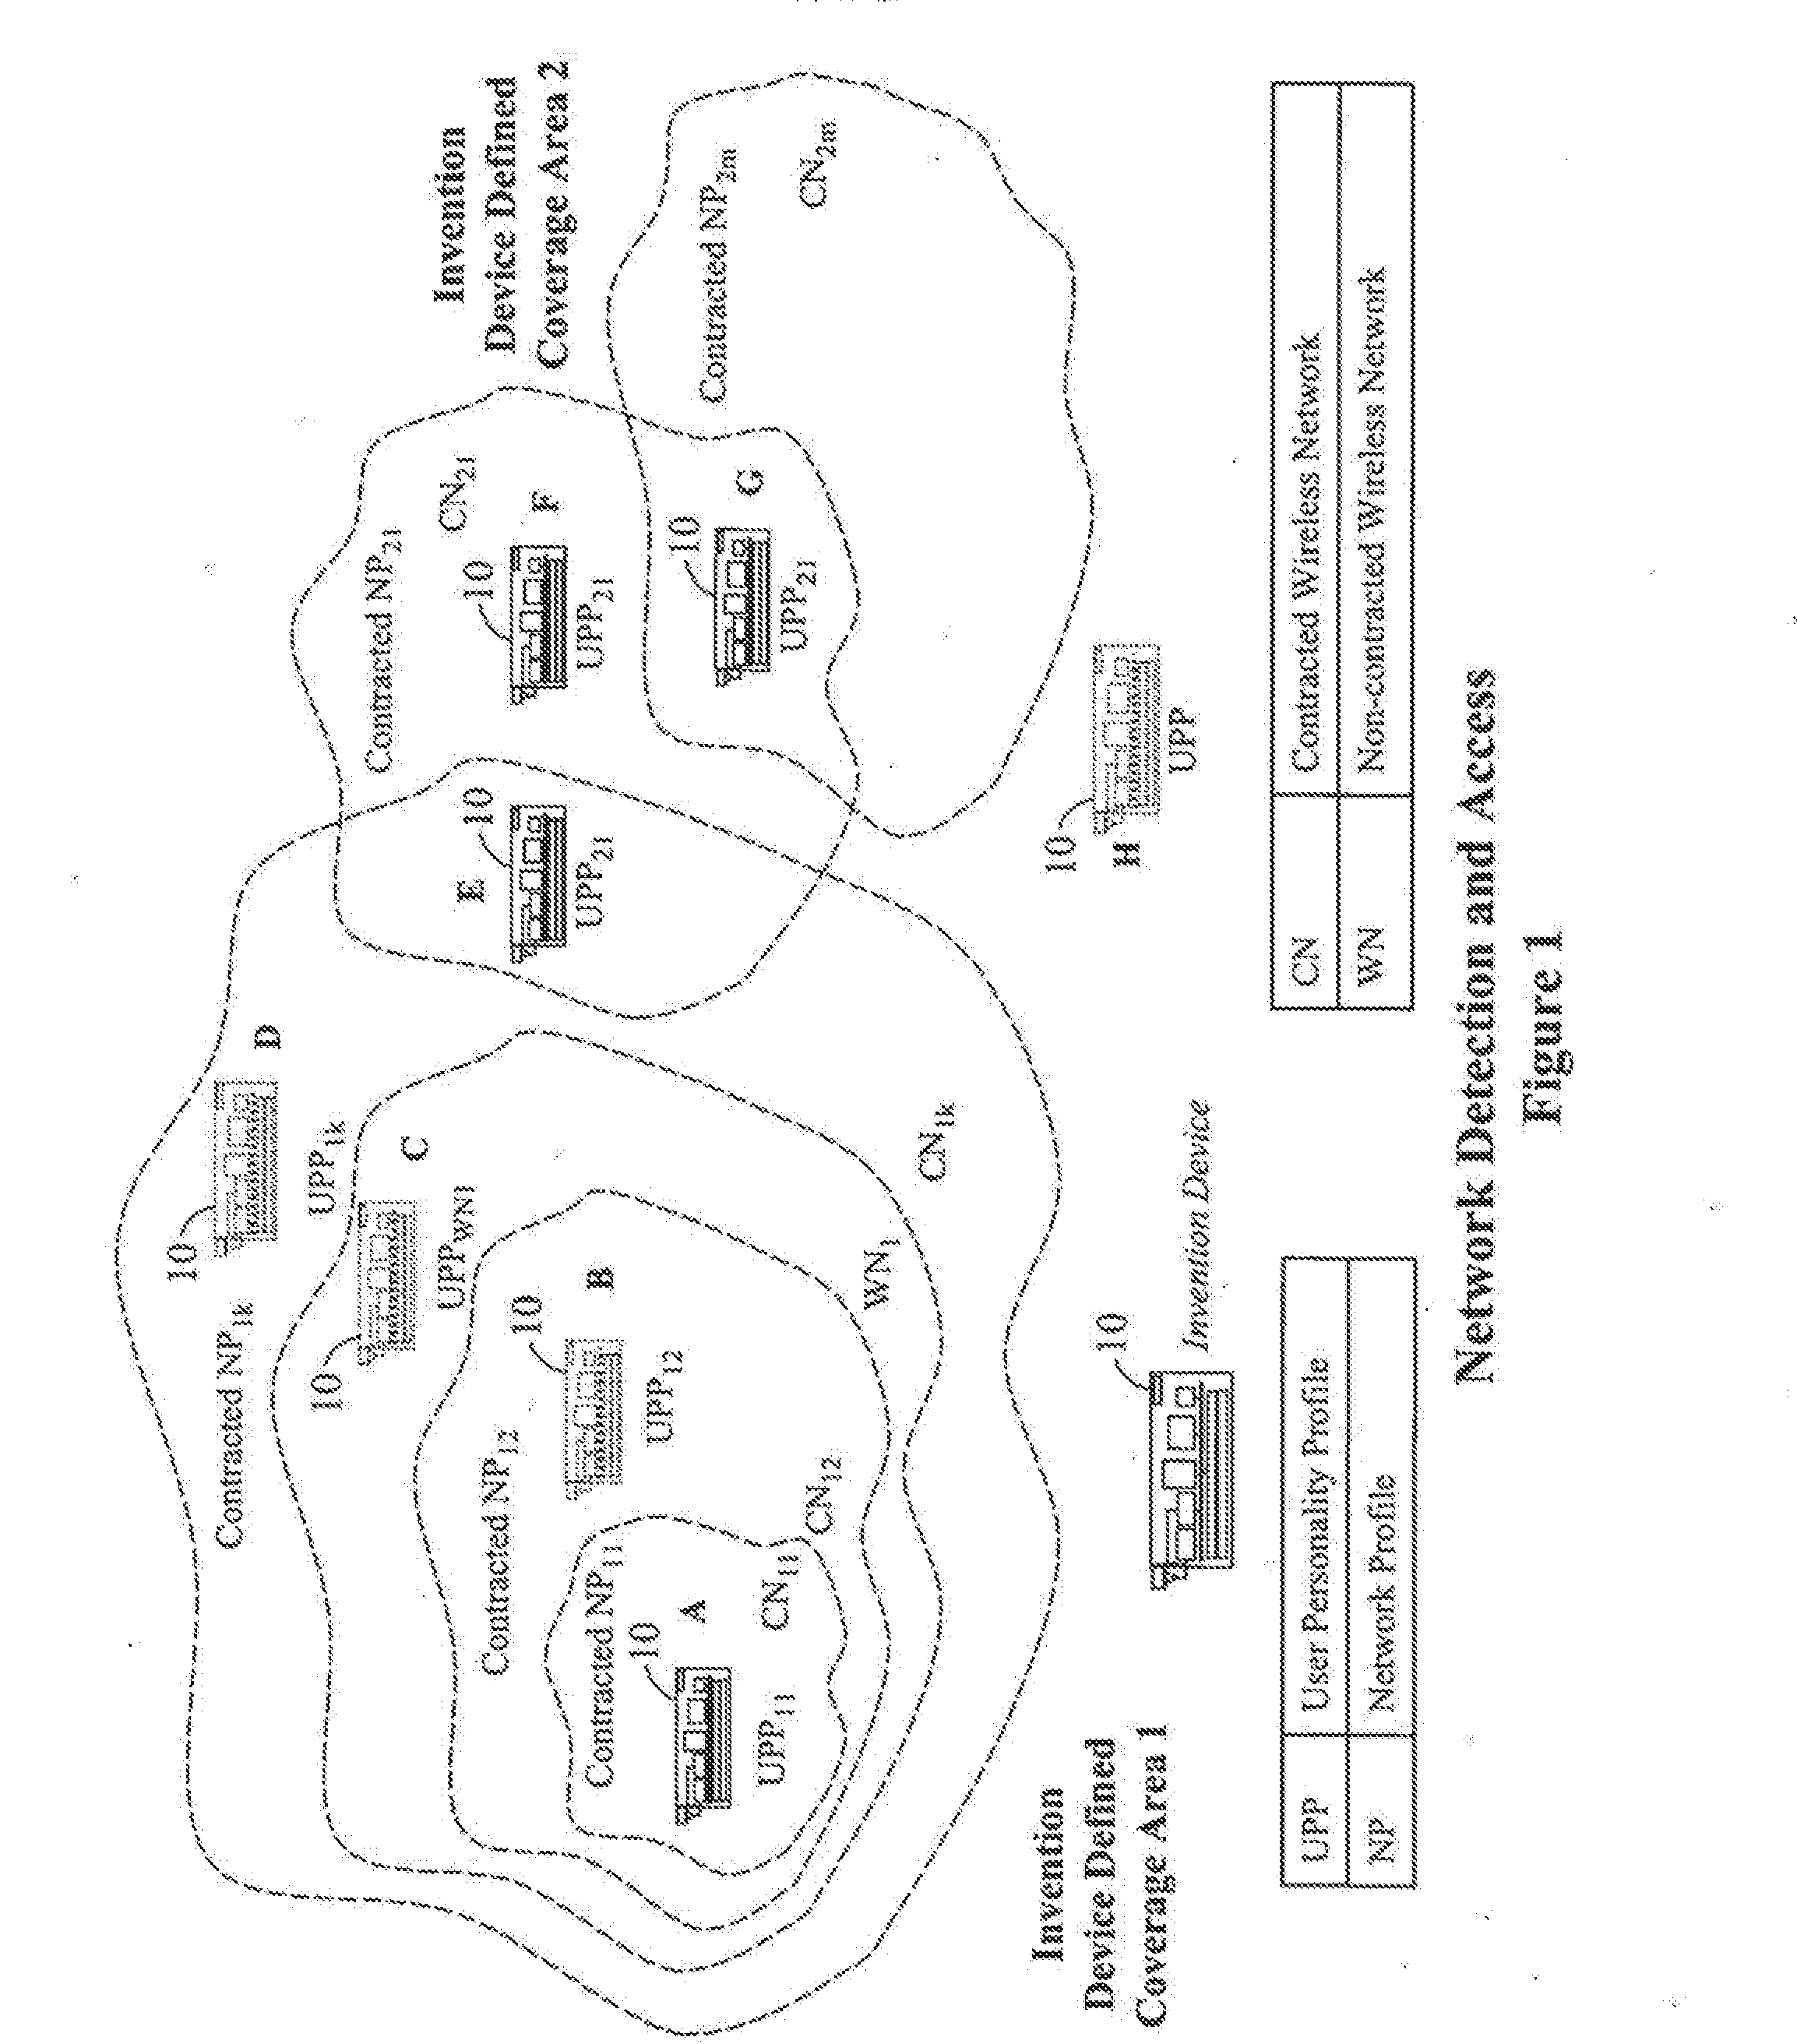 Advanced multi-network client device that utilizes multiple digital radio processors for implementing frequency channel aggregation within different spectrum bands